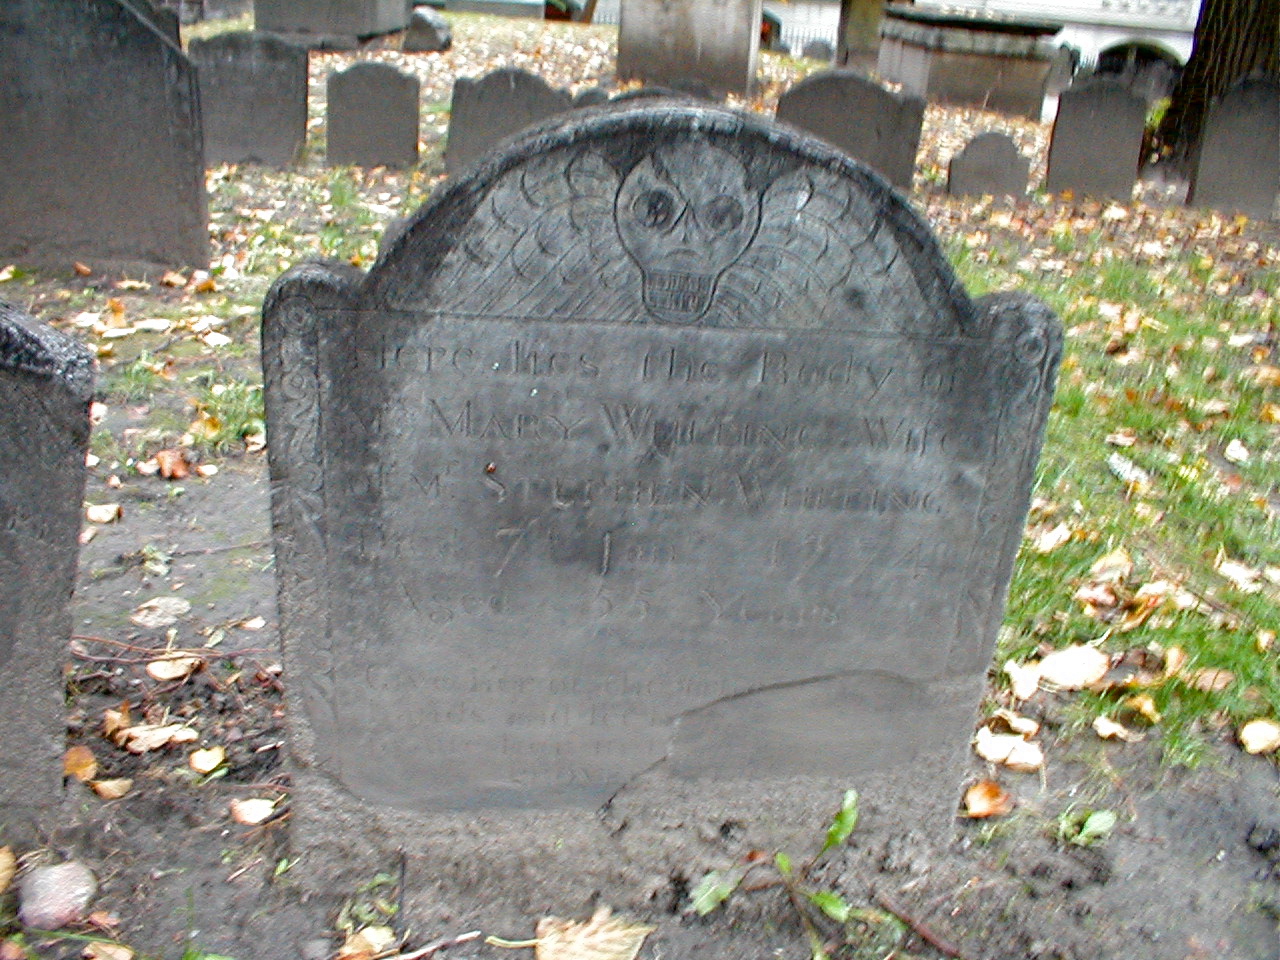 an old headstone stands in the grave yard